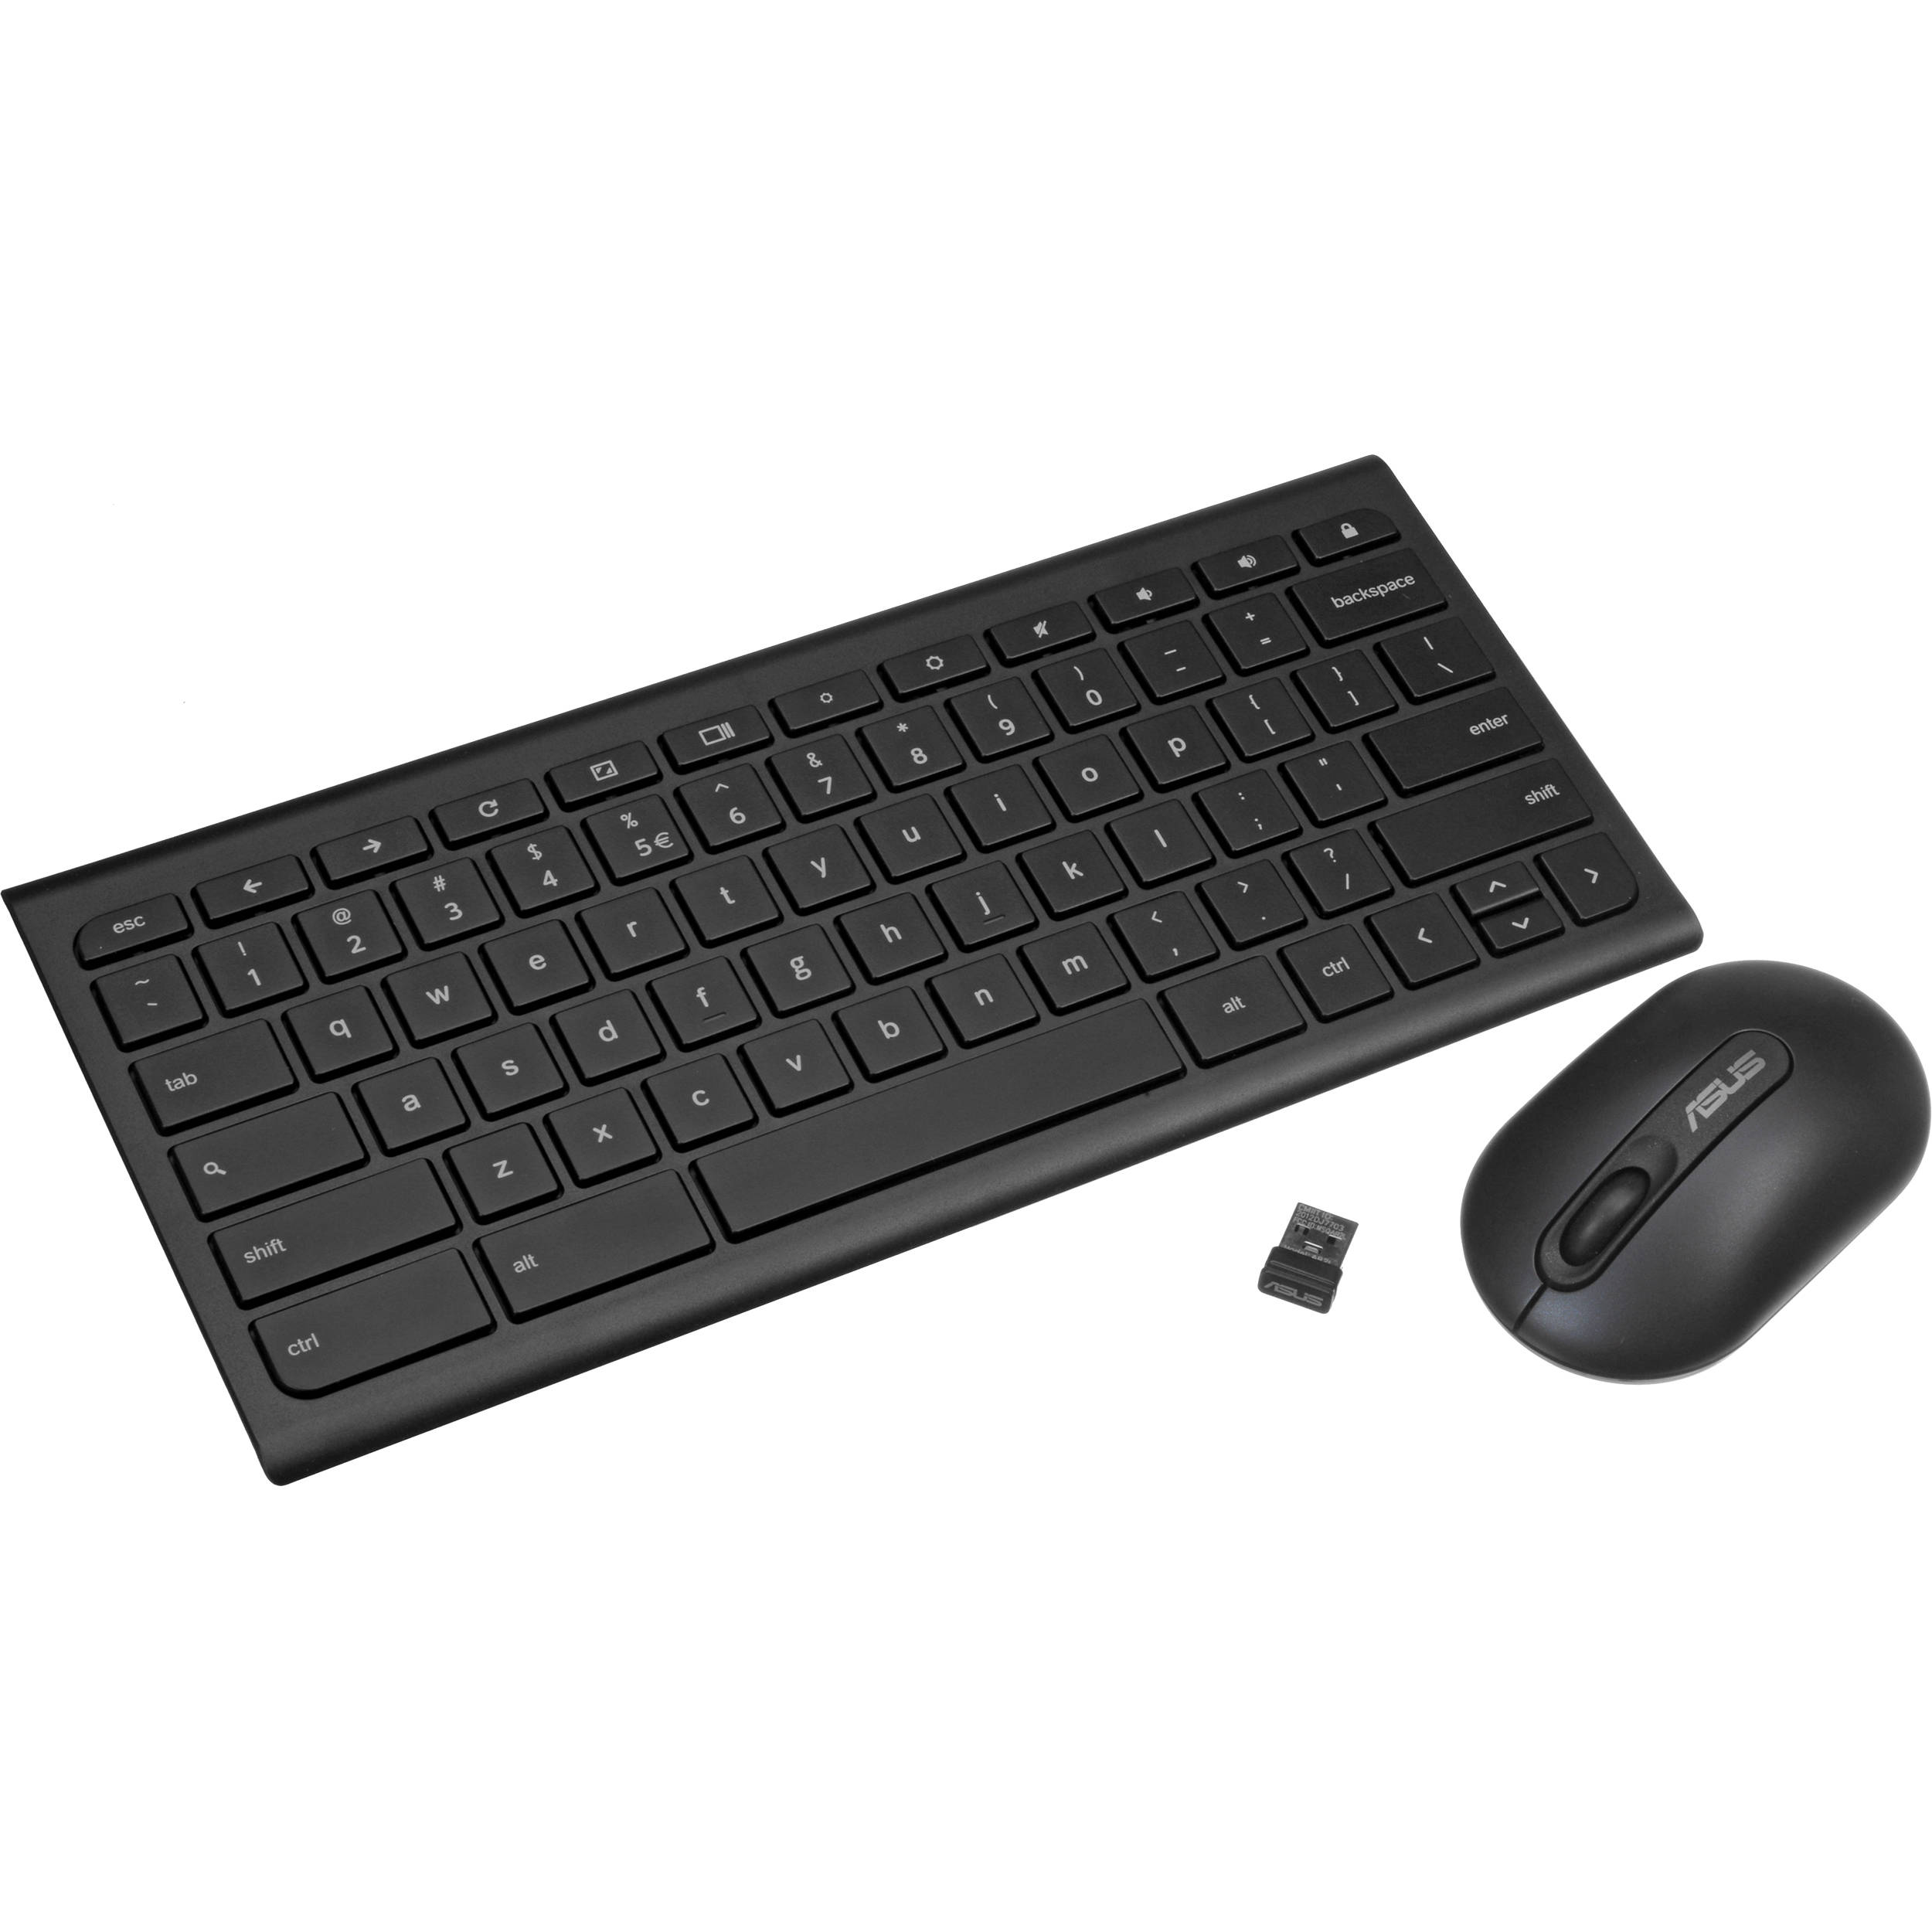 Asus Chromebox Wireless Kbm Keyboard And Mouse 90ms0000 P